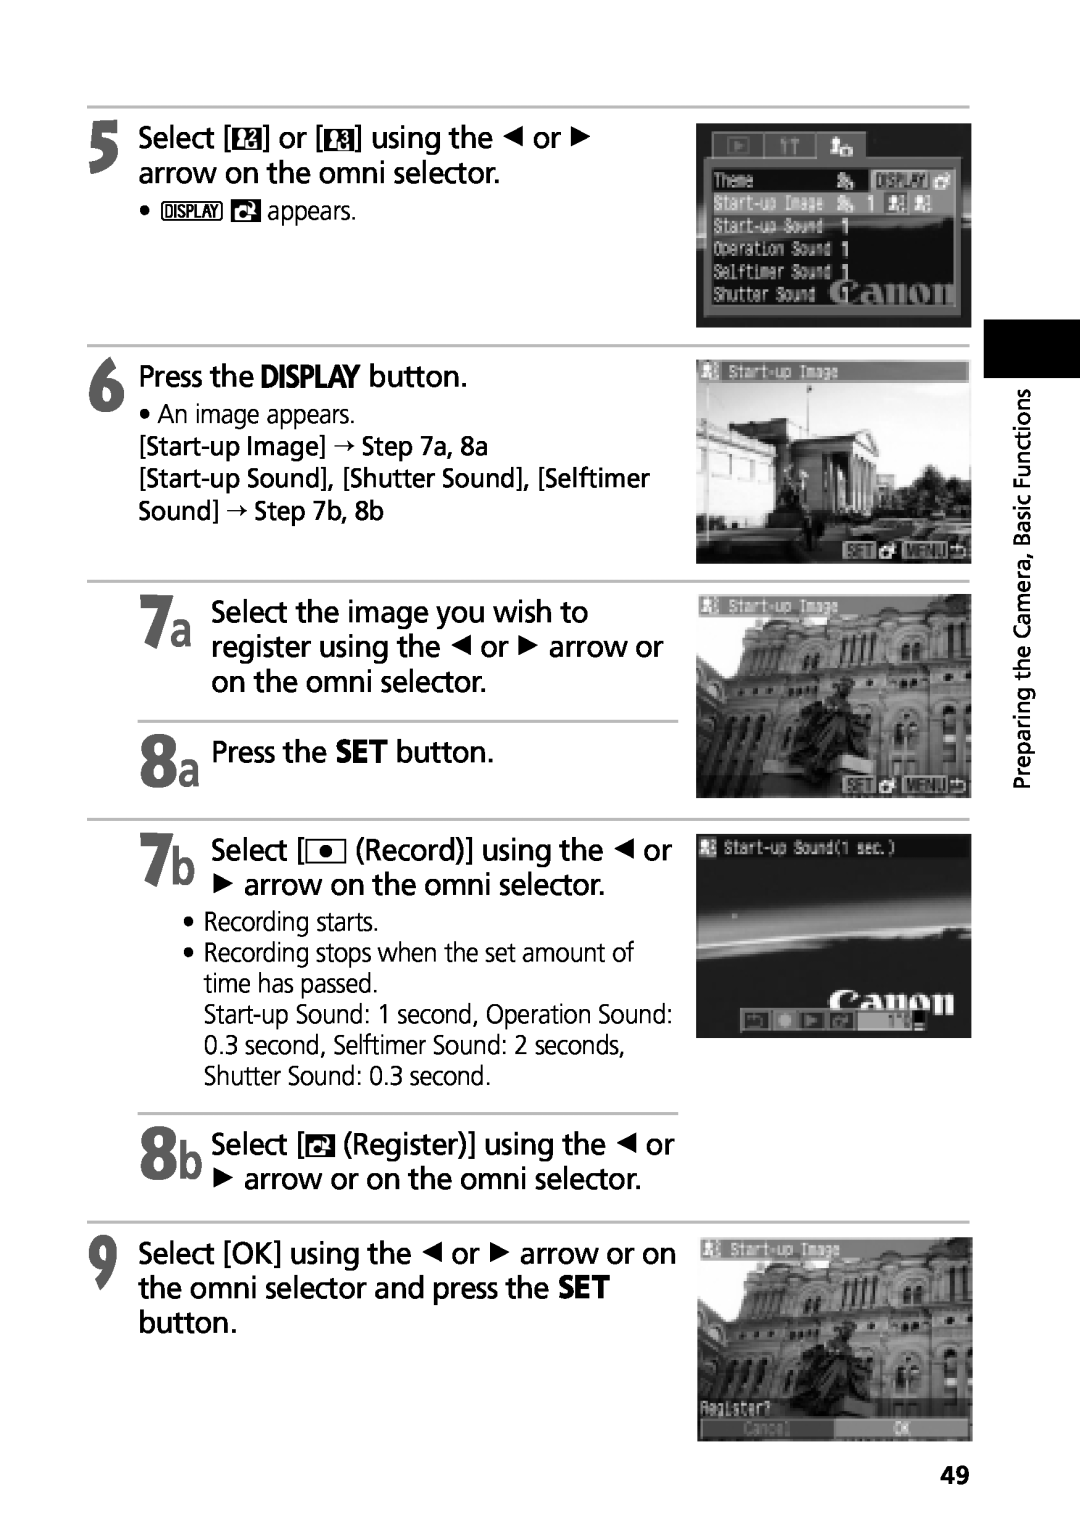 Canon G3 manual Select or using the B or A arrow on the omni selector 